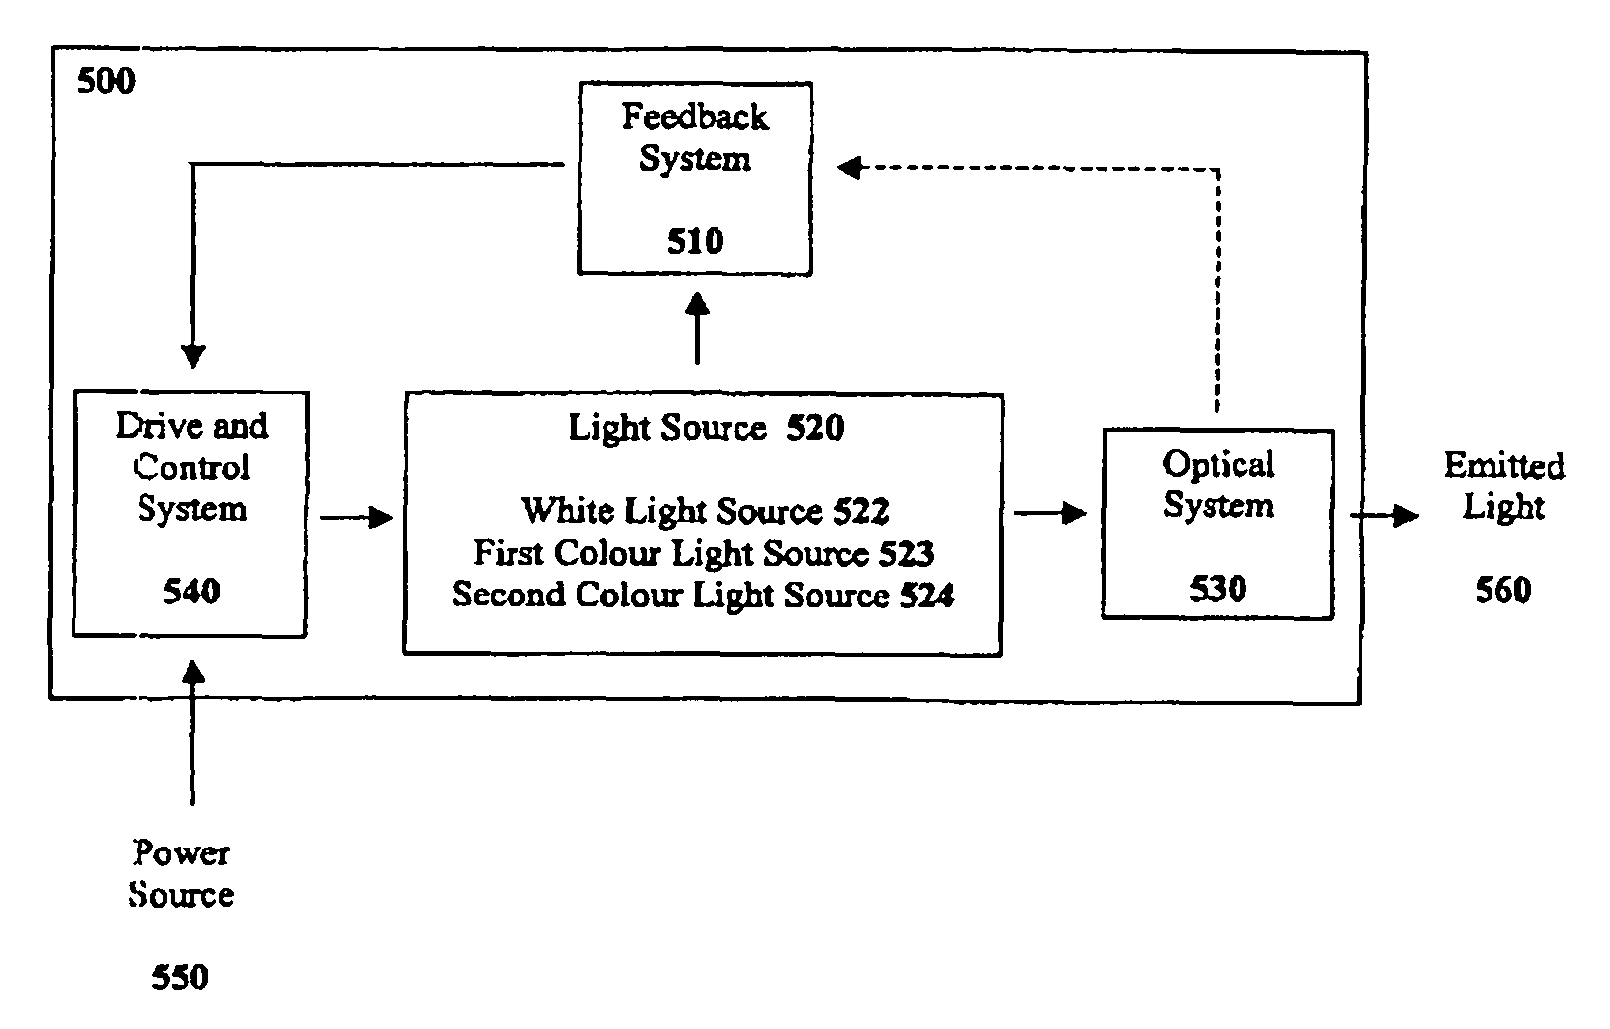 White light luminaire with adjustable correlated colour temperature